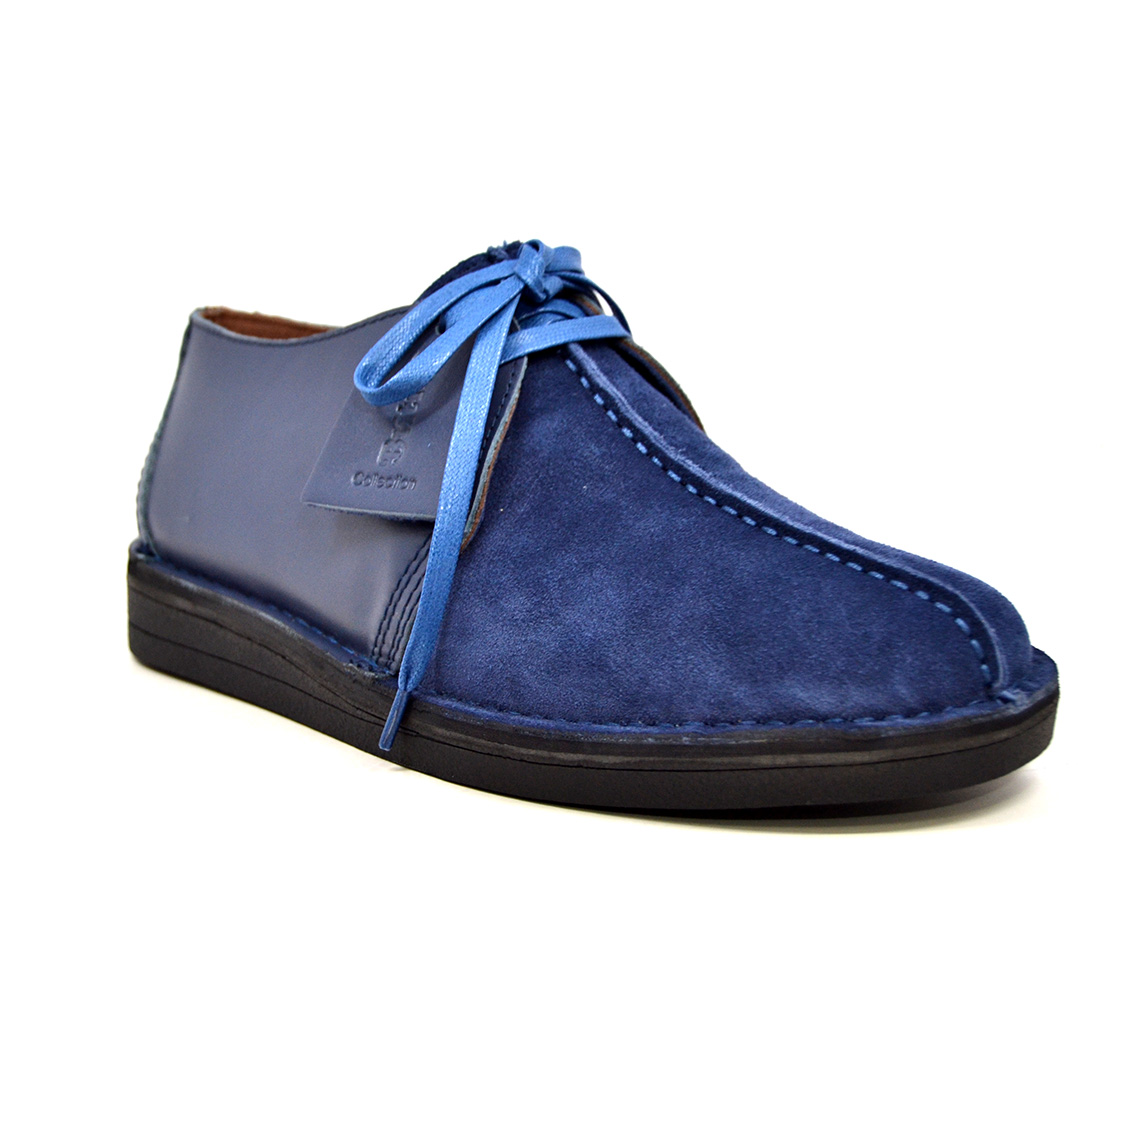 British Collection Kingston, Blue Leather and Suede [6391-2] - $99.99 ...